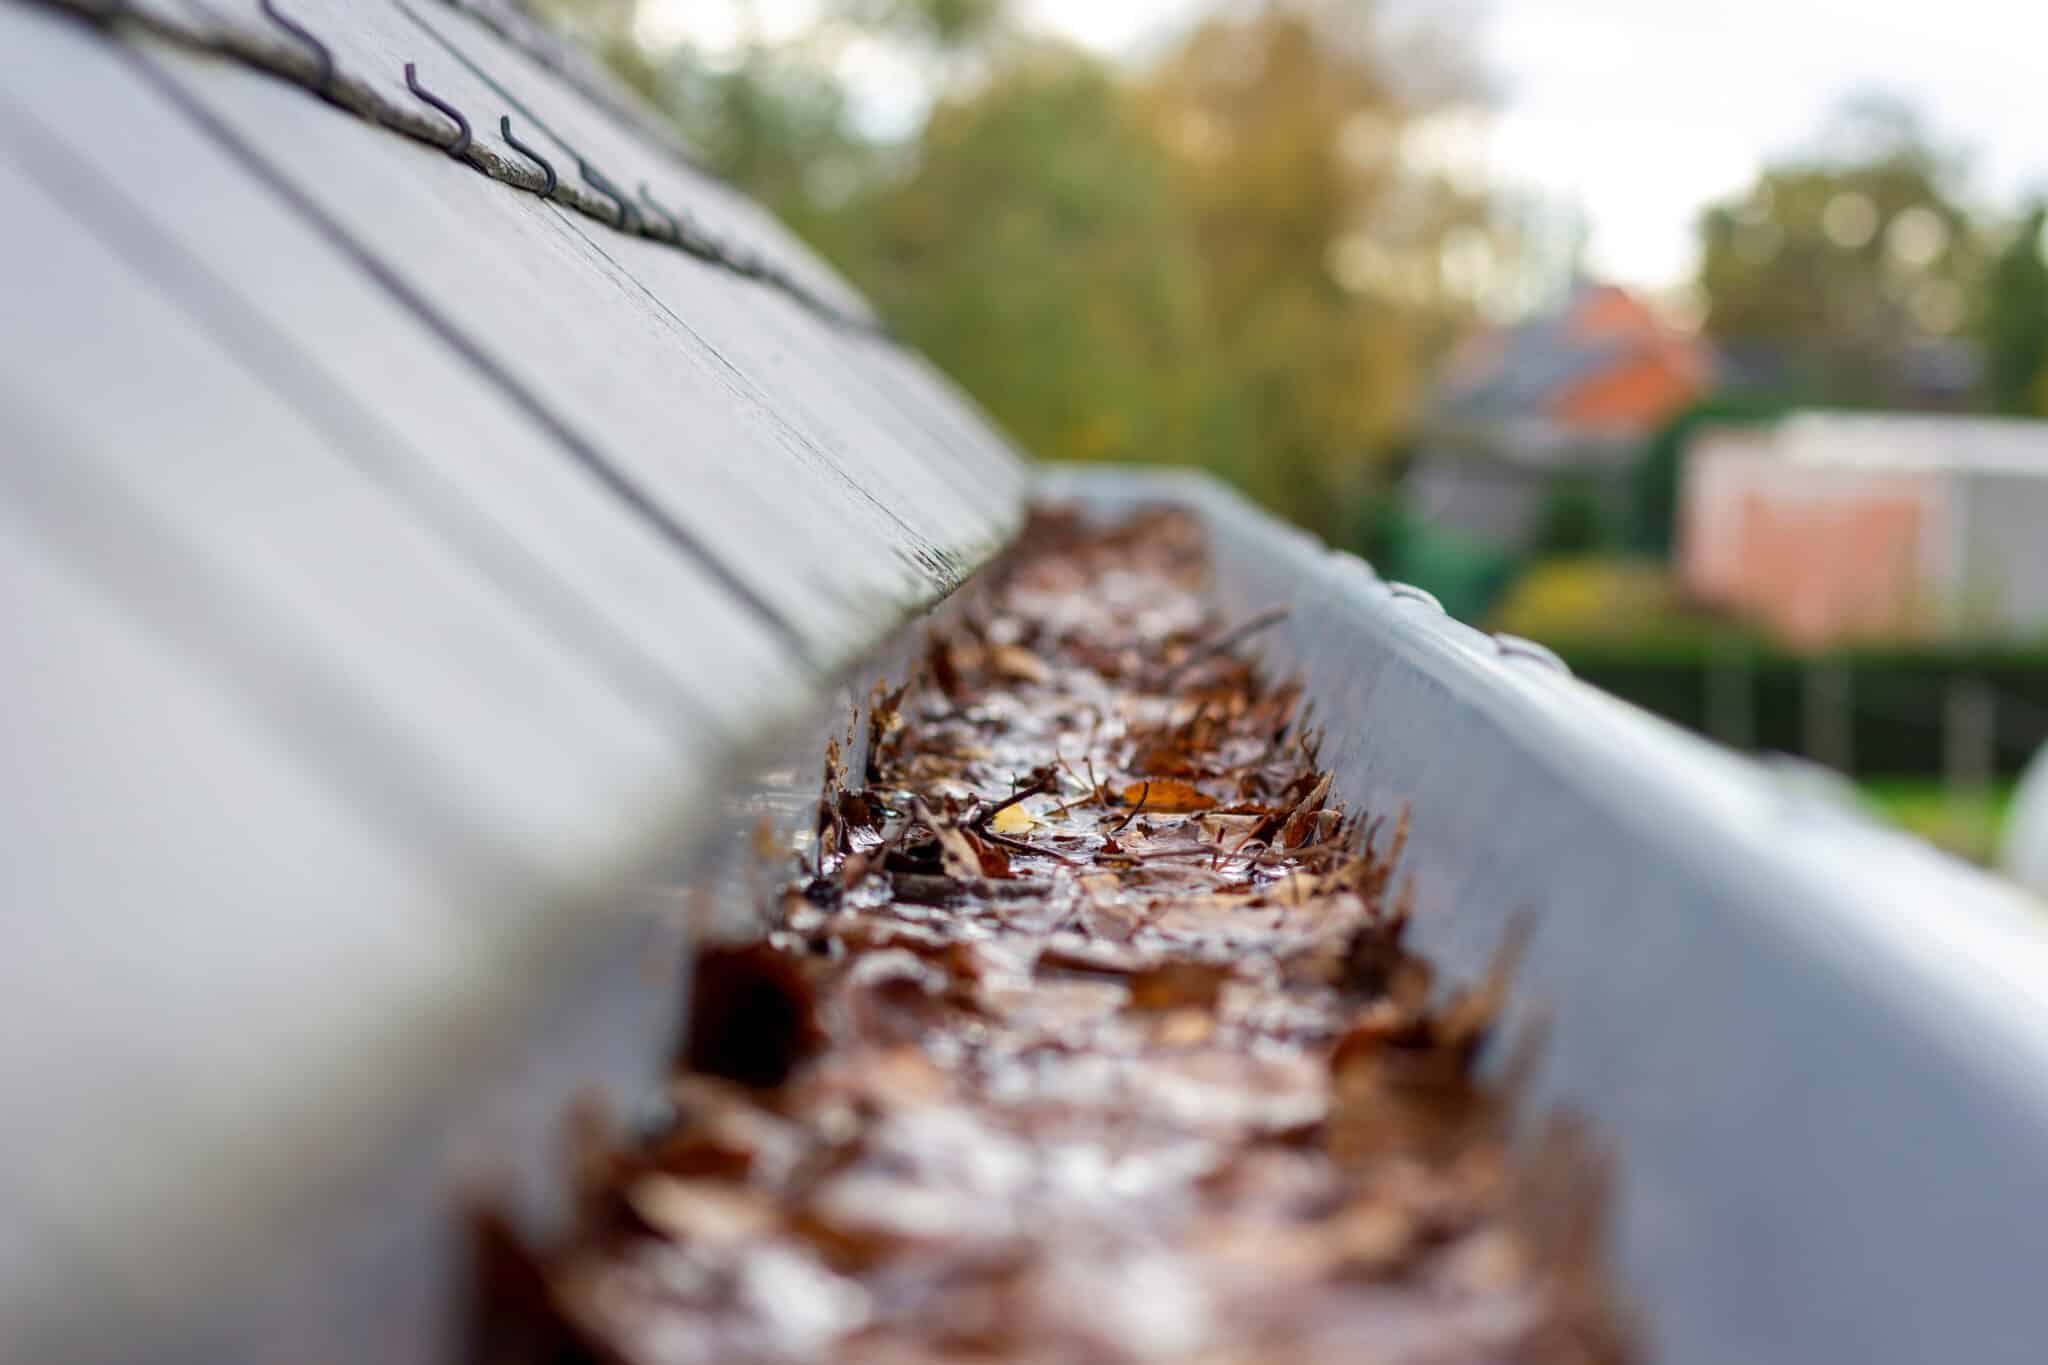 Great Gutter-Cleaning Tools To Make Your Life Easier